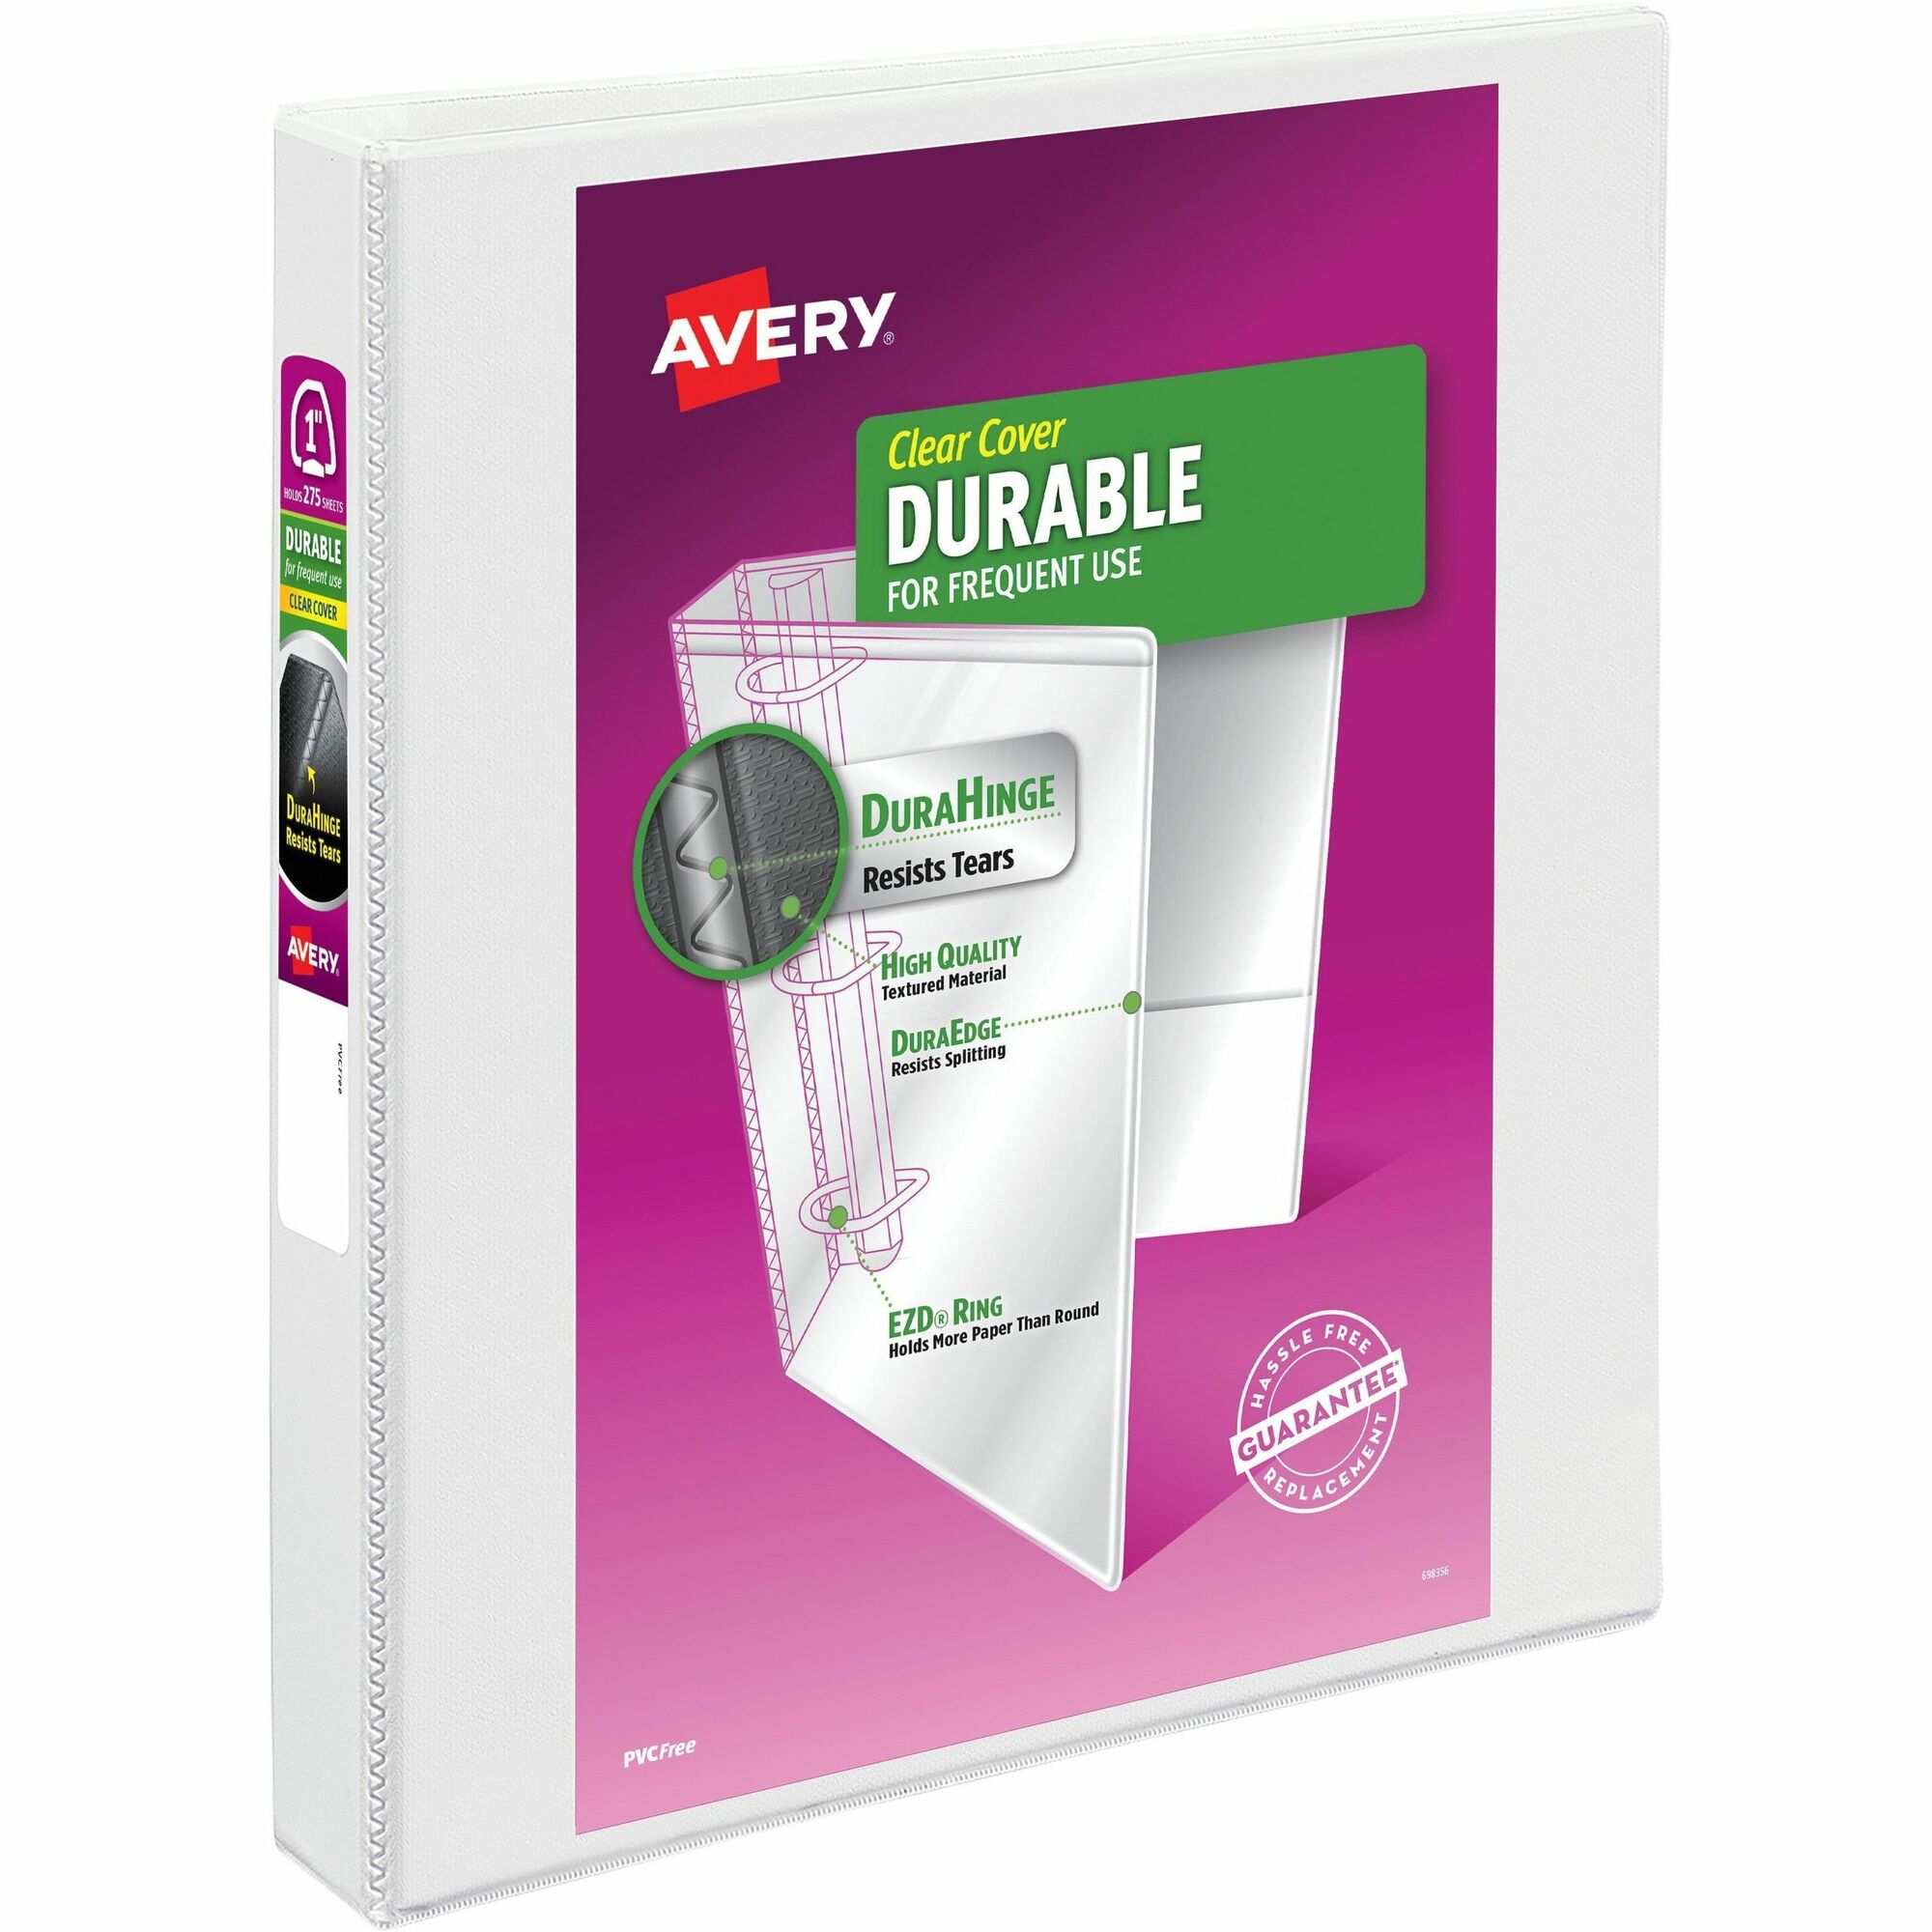 Avery Rectangle Labels with Sure Feed, 2 inch x 3 inch, 64 White Labels, Print-to-the-Edge, Surface Safe Clean Removable Label Adhesive, Laser/Inkjet